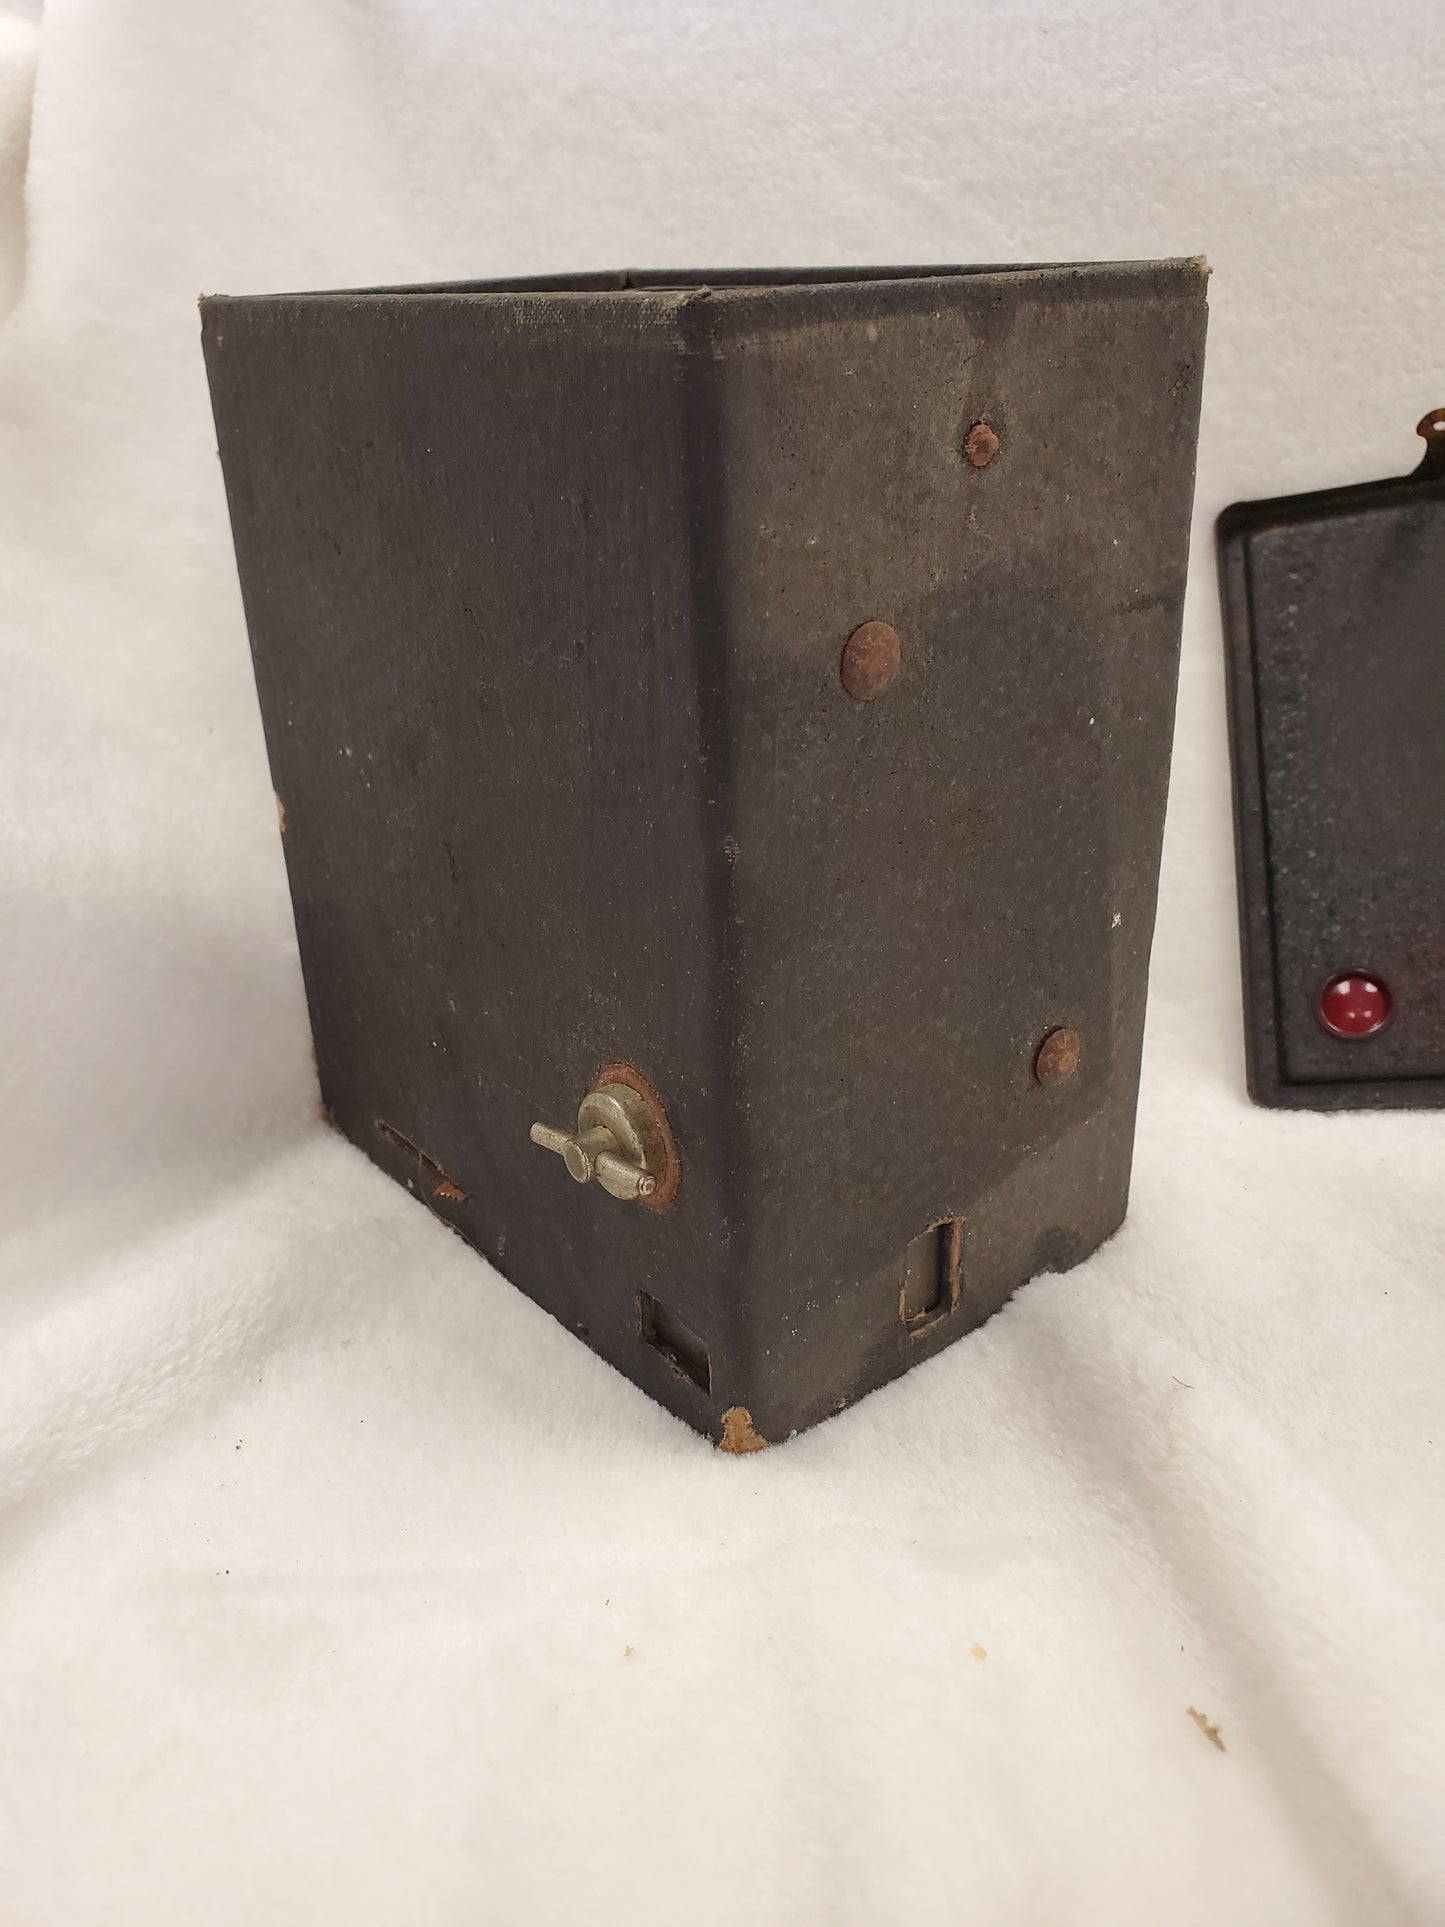 Early 1900's Ansco Buster Brown Camera Box